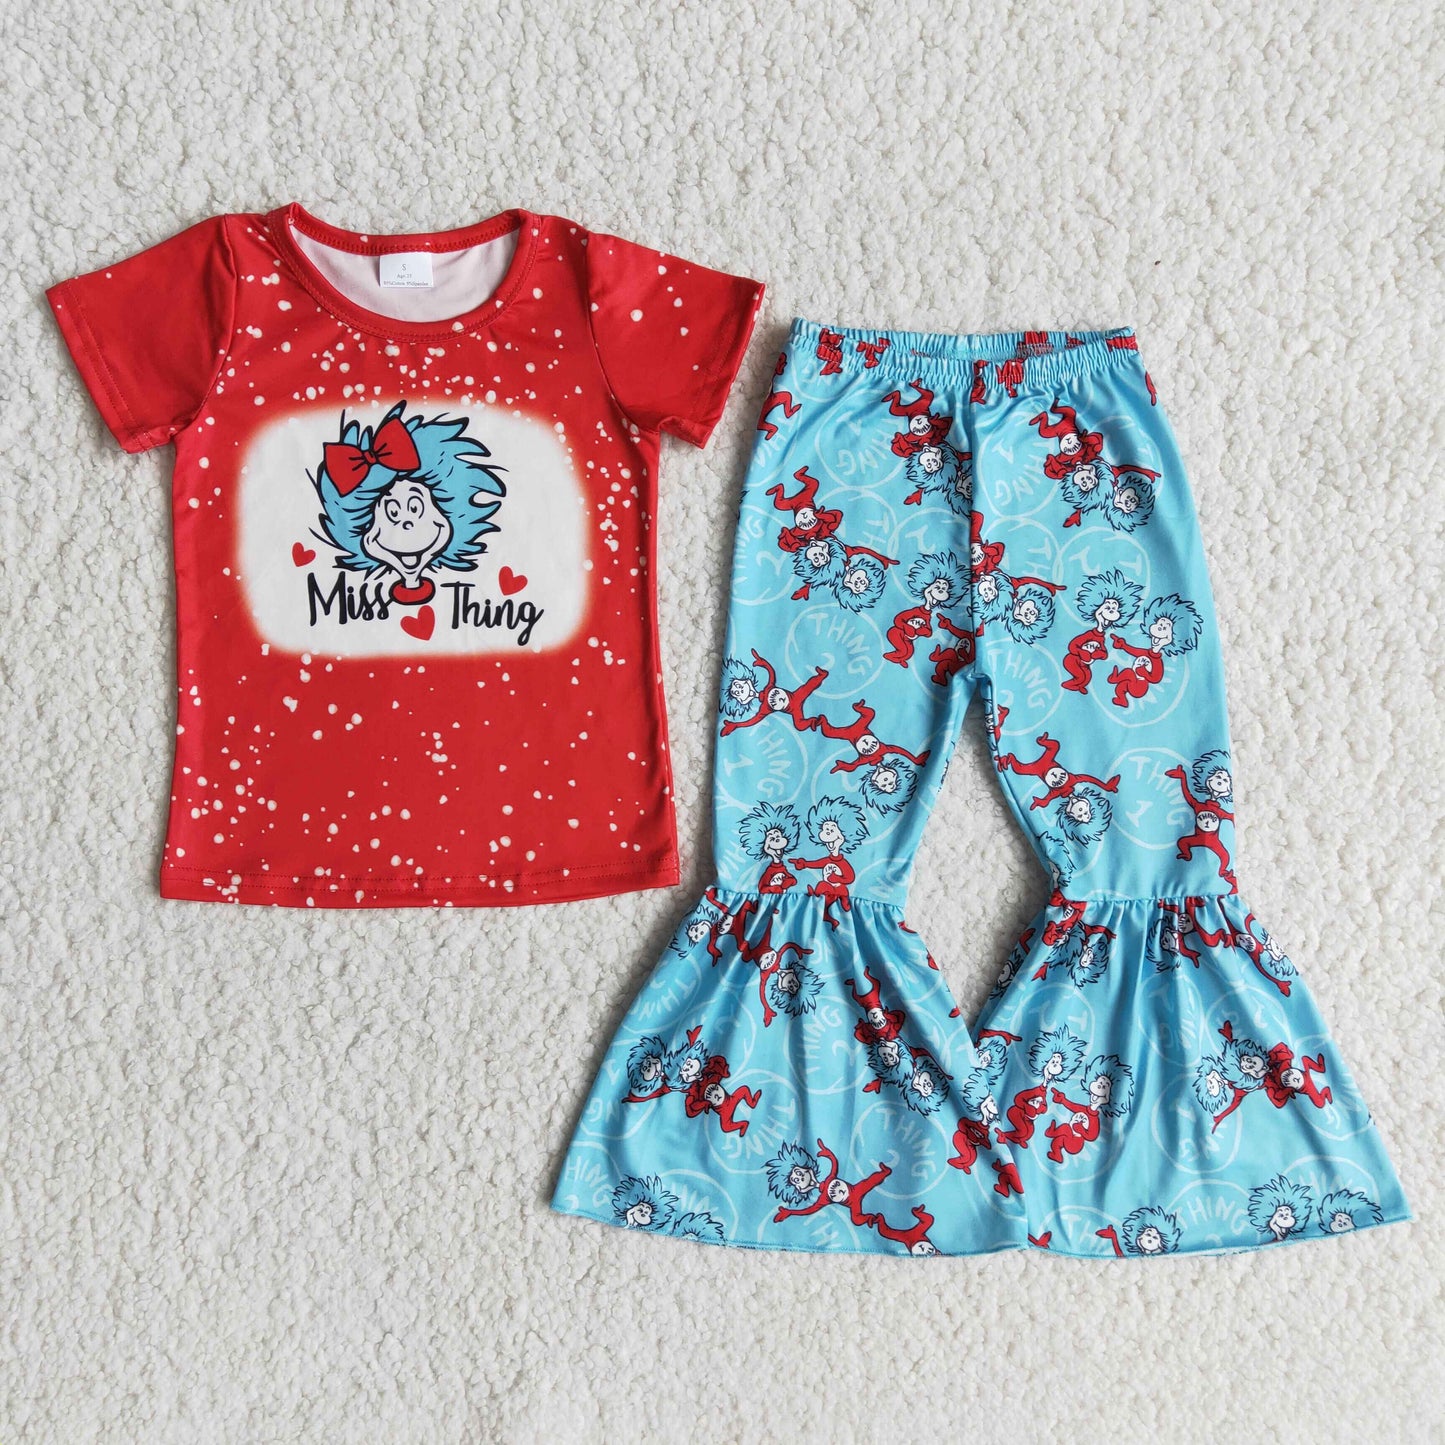 Red Cat Blue bell pants girls outfits